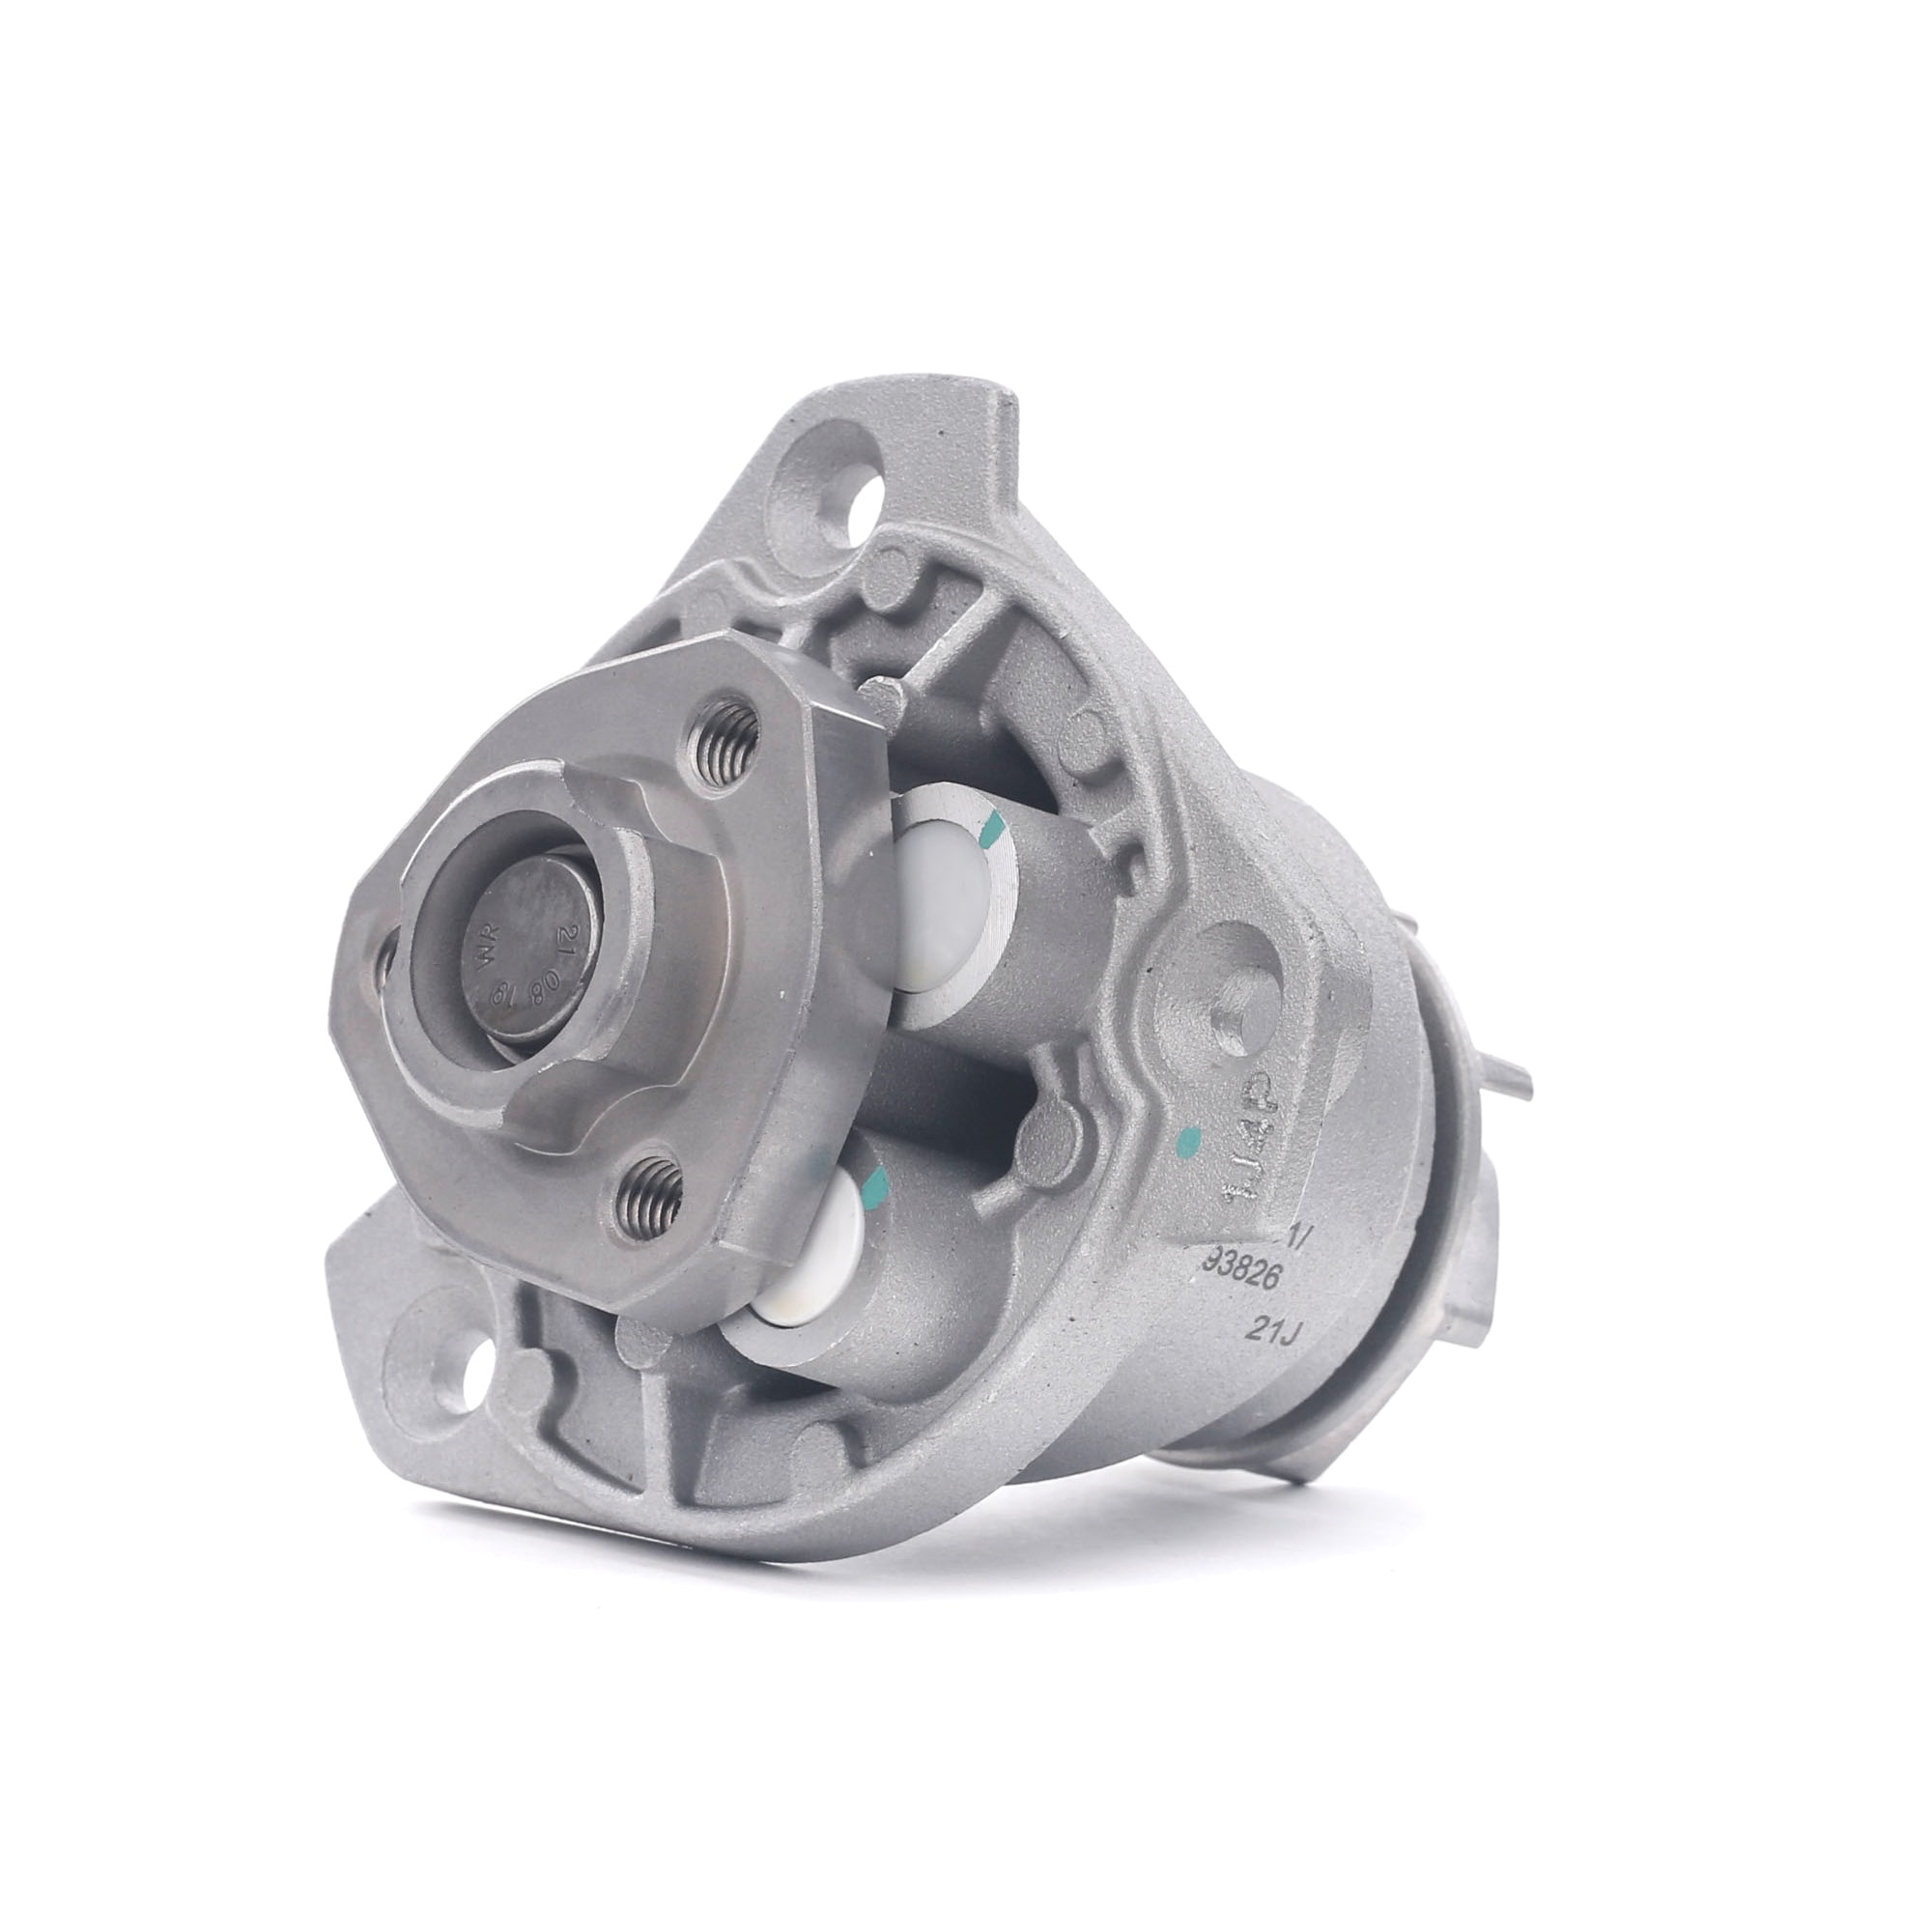 STARK SKWP-0520212 Water pump Cast Aluminium, without belt pulley, with flange, with seal ring, Mechanical, Metal impeller